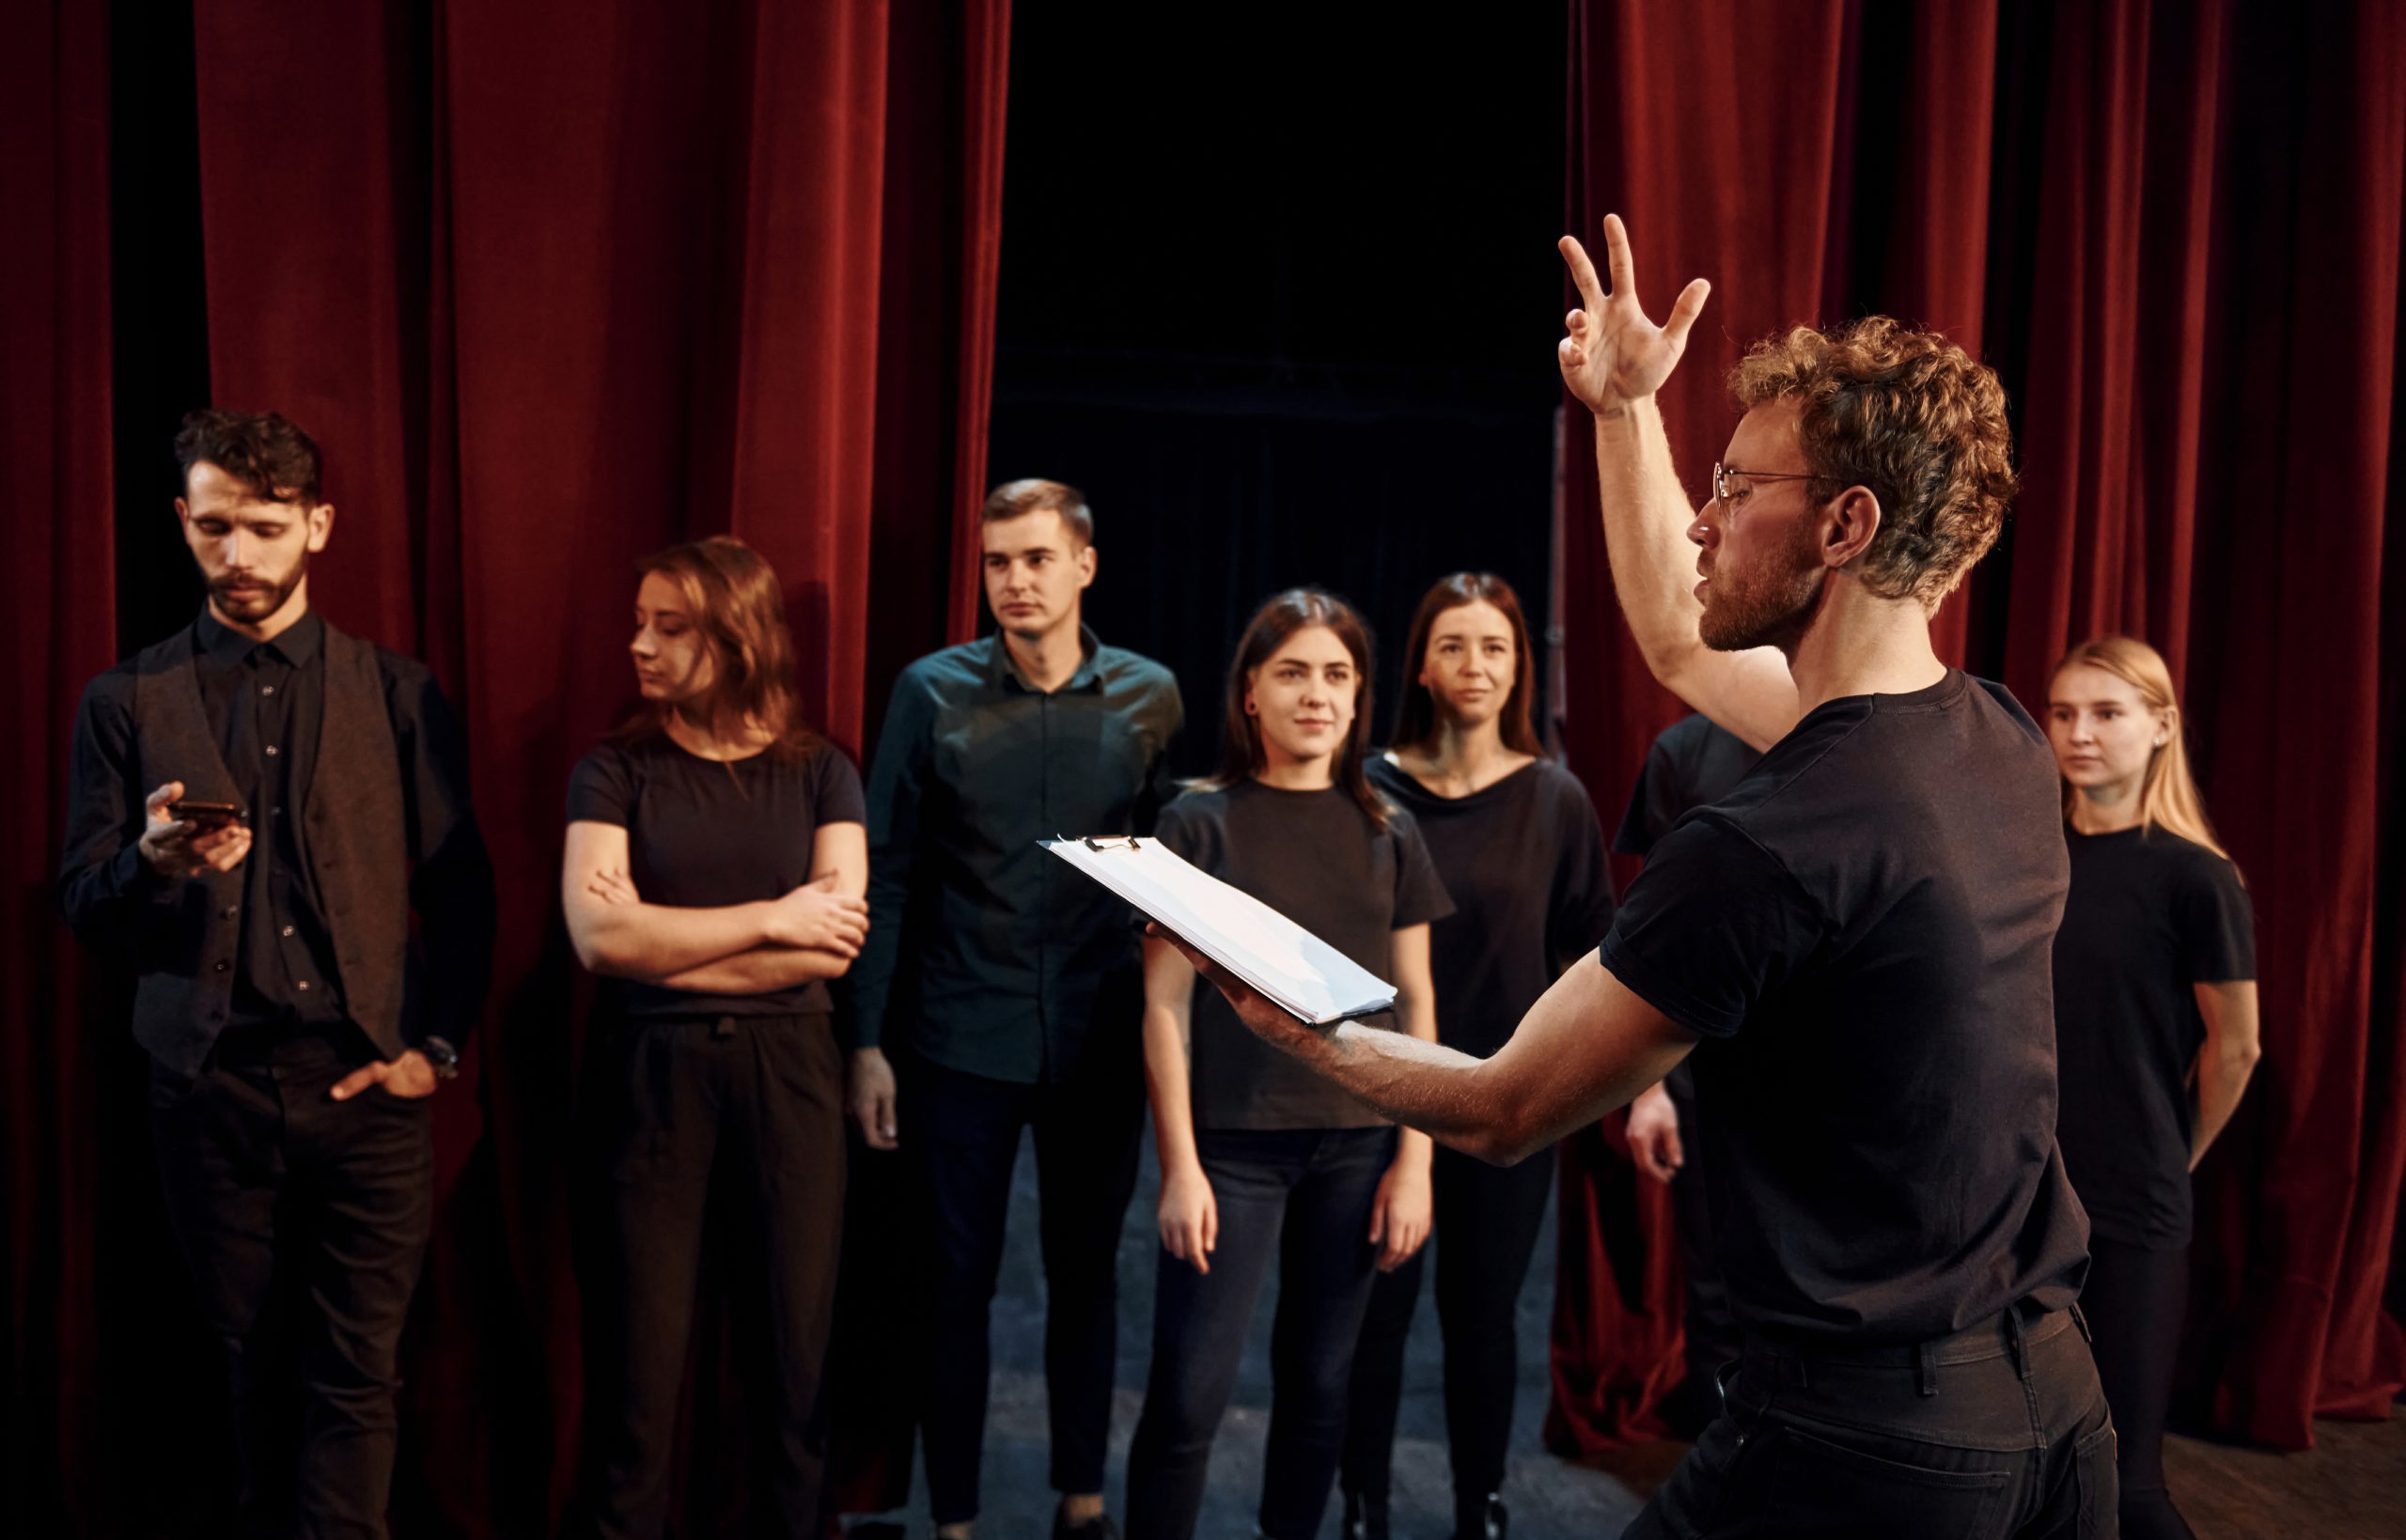 Man with notepad practice his role. Group of actors in dark colored clothes on rehearsal in the theater